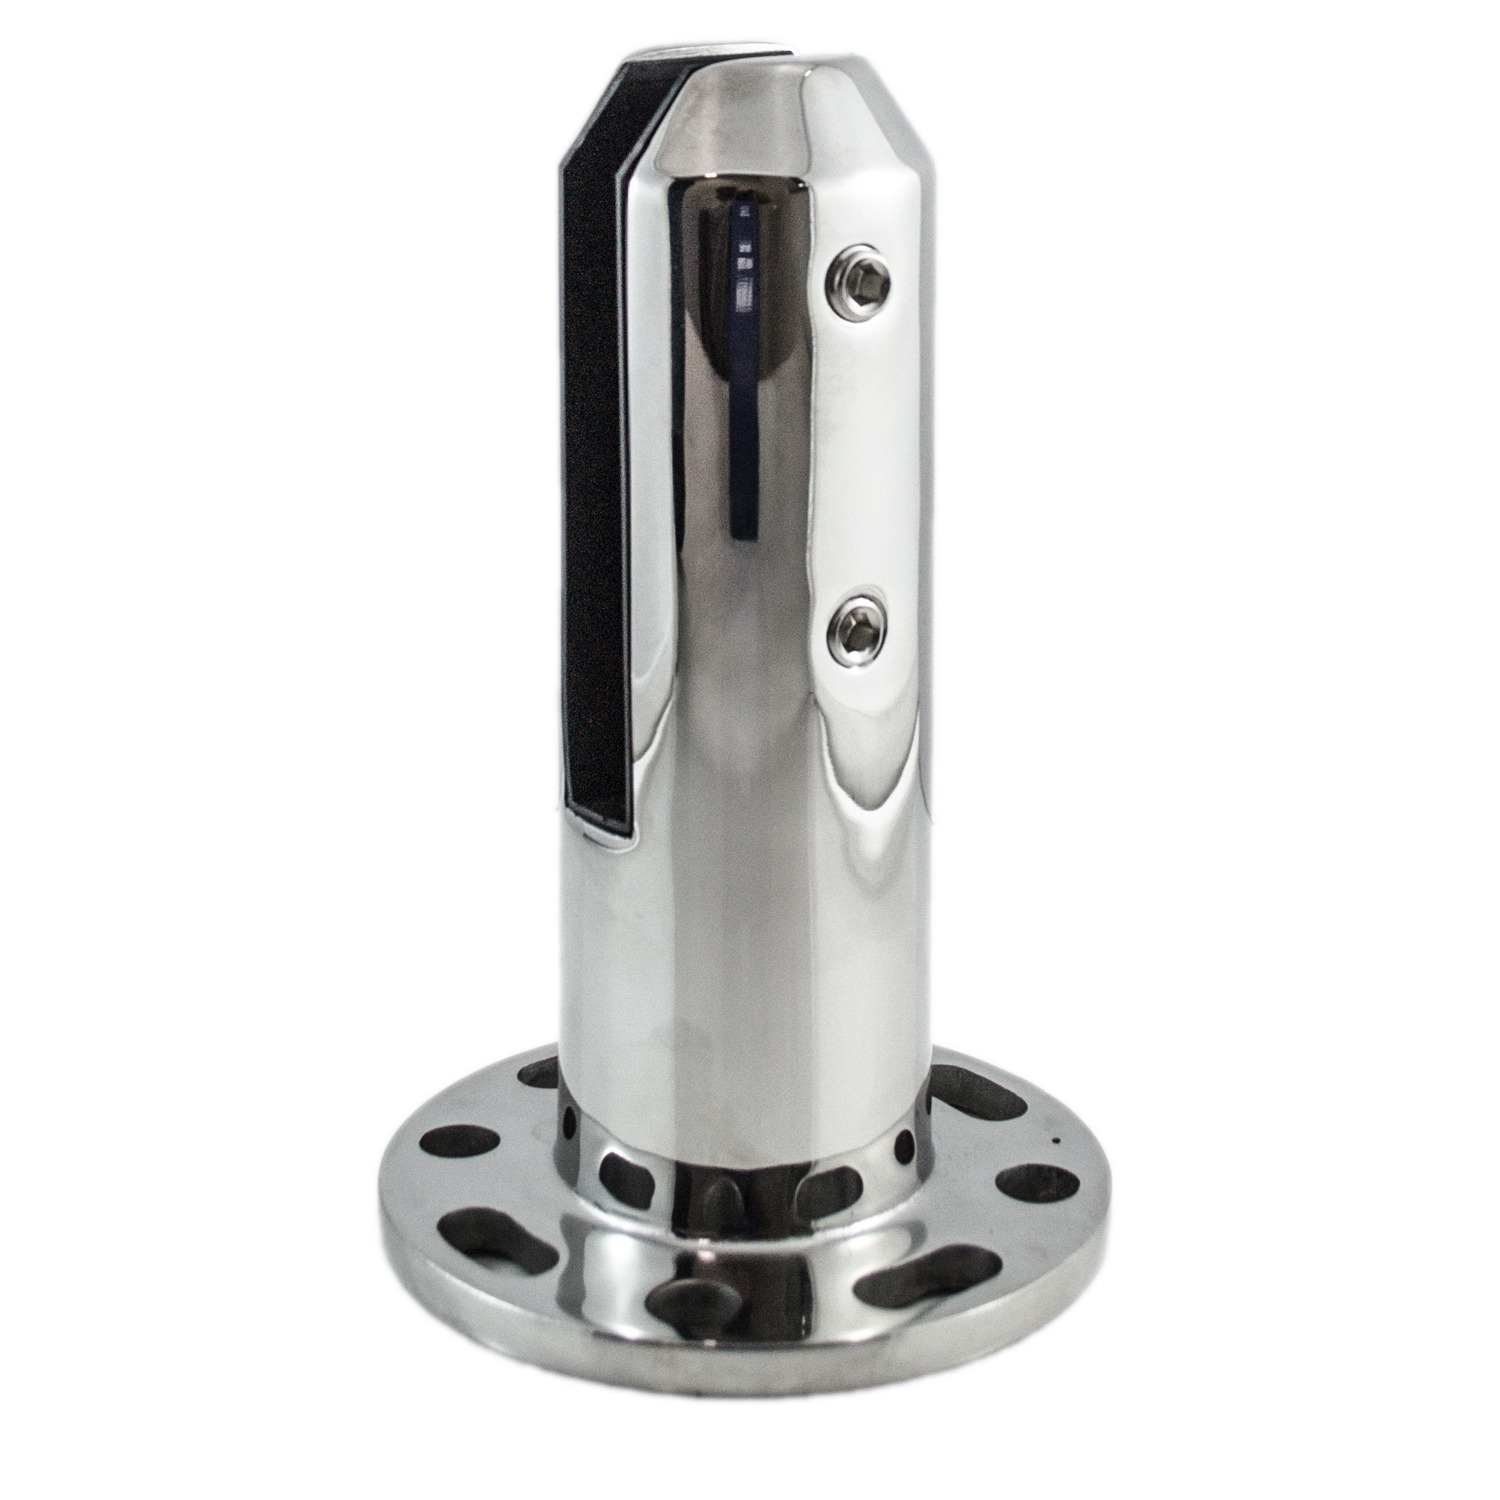 Mini Post 50mm Round with Base Stainless Steel (Pool & Balustrade Compliant) -Polished